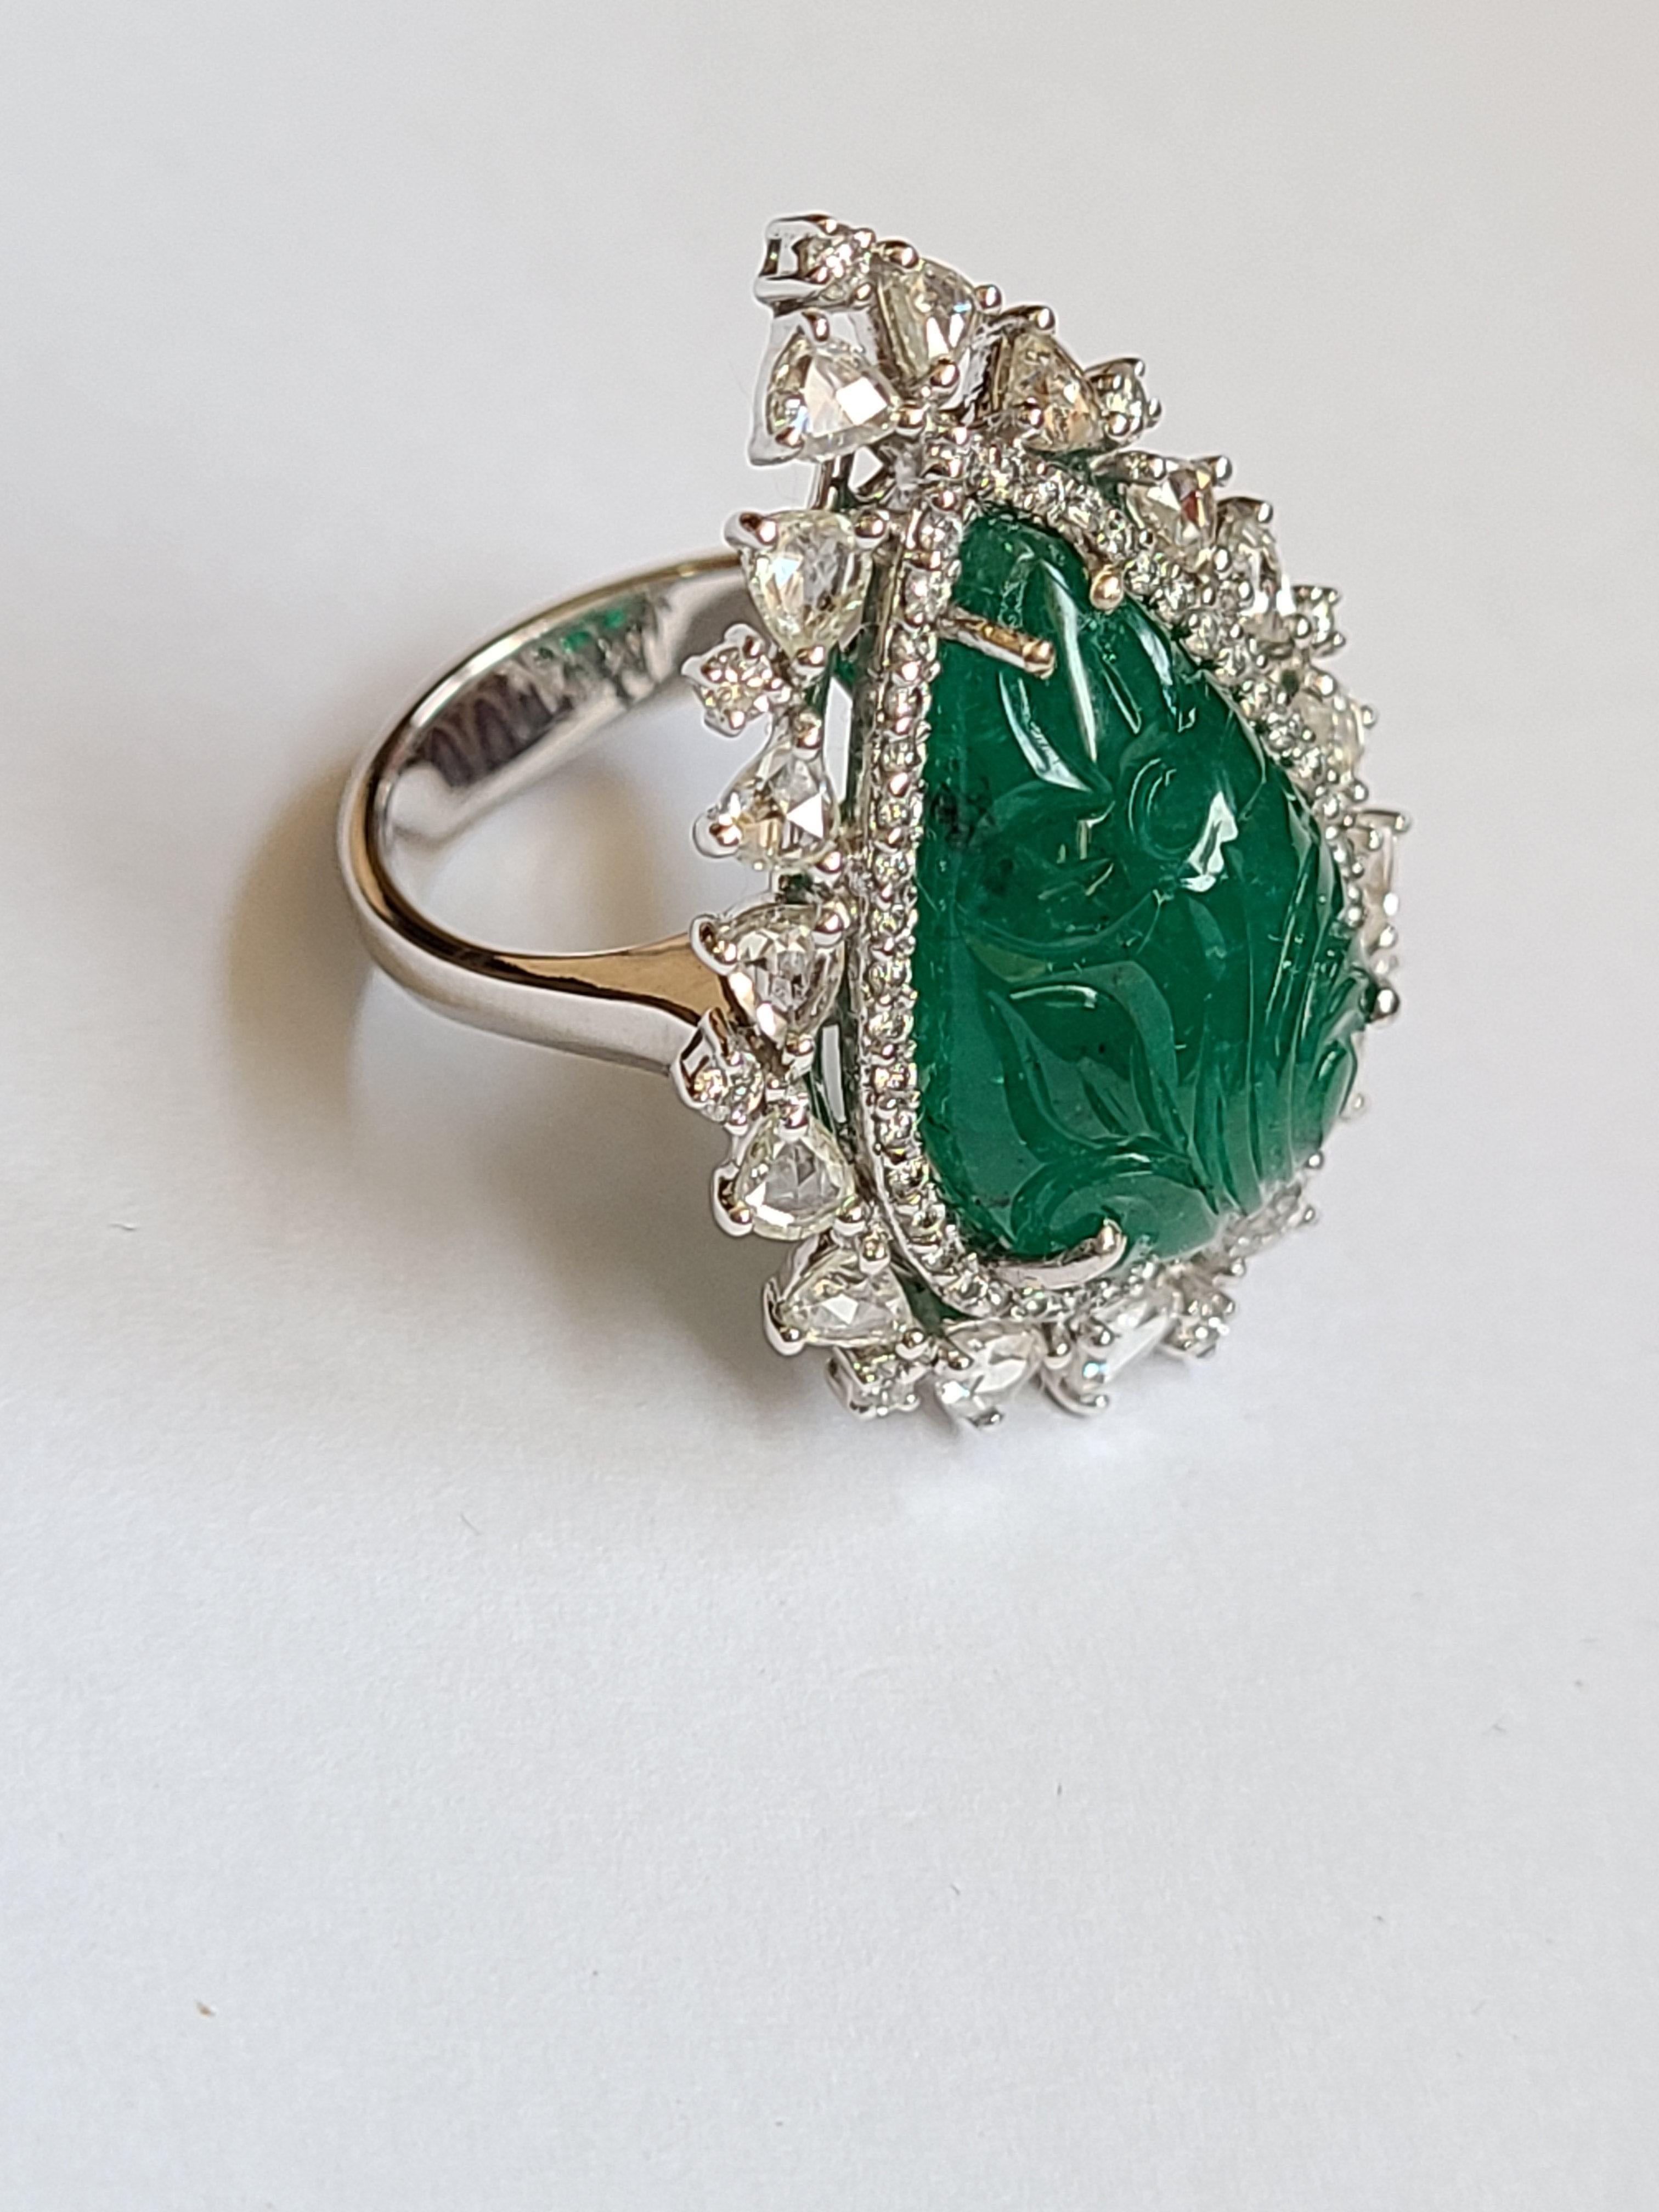 A beautiful and classic Emerald carving ring set in 18k gold with fullcut and rosecut diamonds. the emerald weight is 12.44 carats . The ring dimensions in cm 3.3 x 1.7 x 2.5 (LXWXH). US size 6